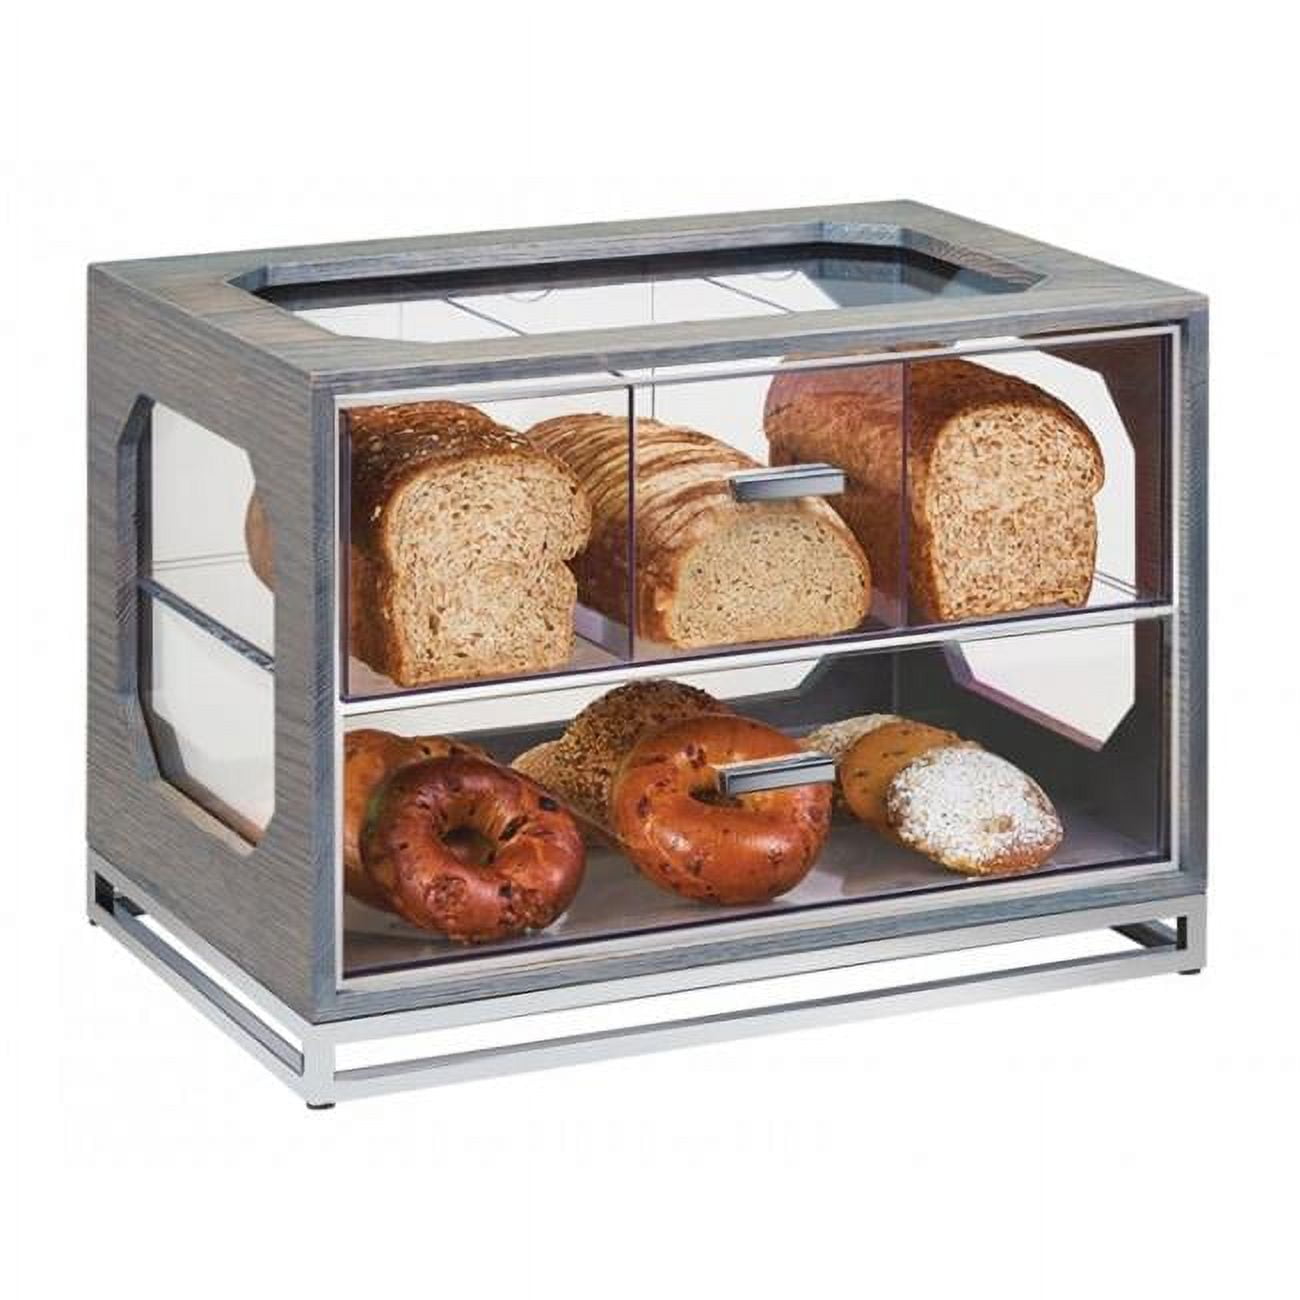 Picture of Cal Mil 3820-83 Ashwood 4 Compartment Gray Oak Wood Bread Case - 20 x 13.5 x 15 in.